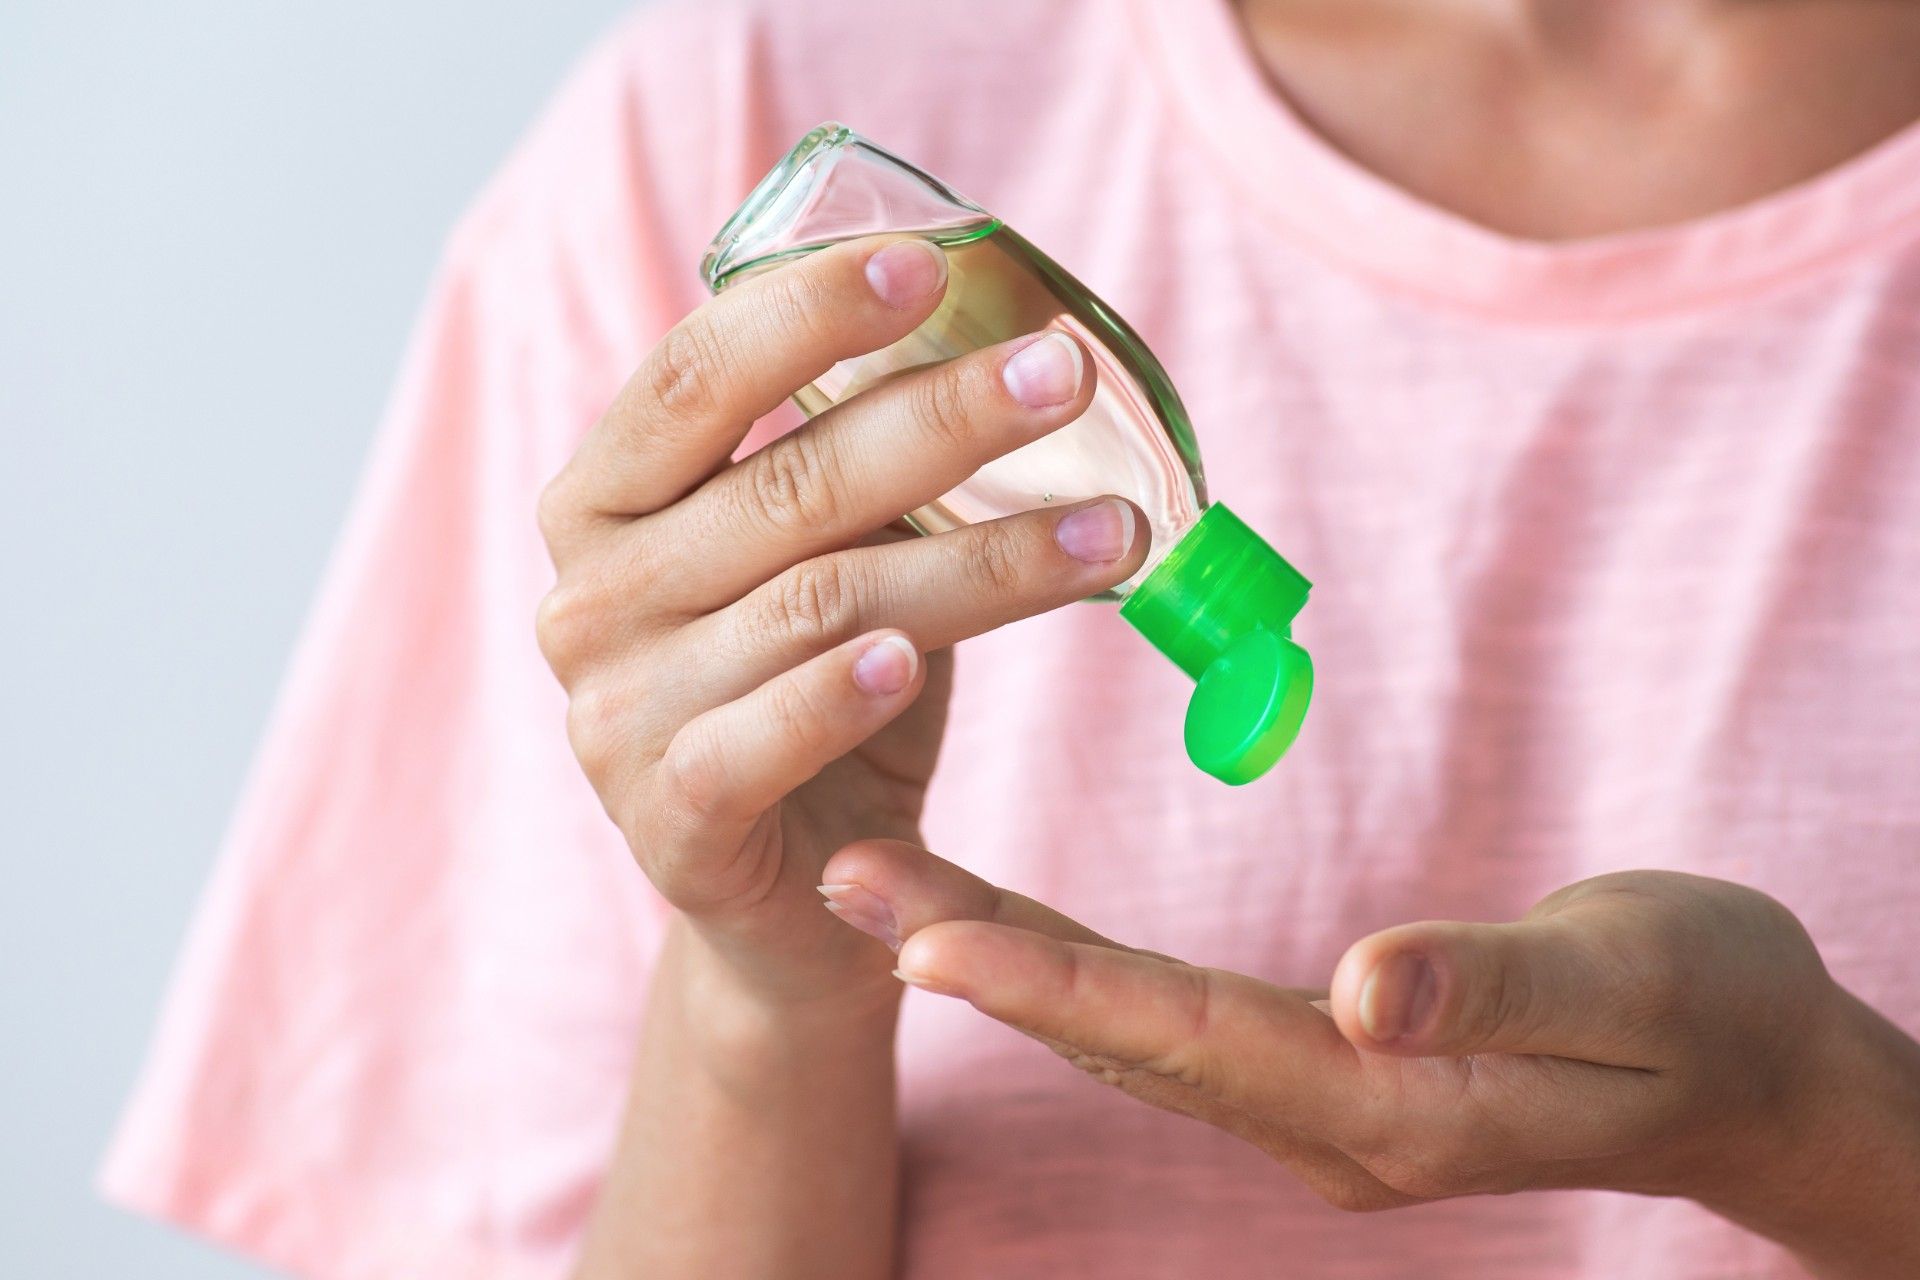 A woman dispenses hand sanitizer into her hand from a bottle with a green cap